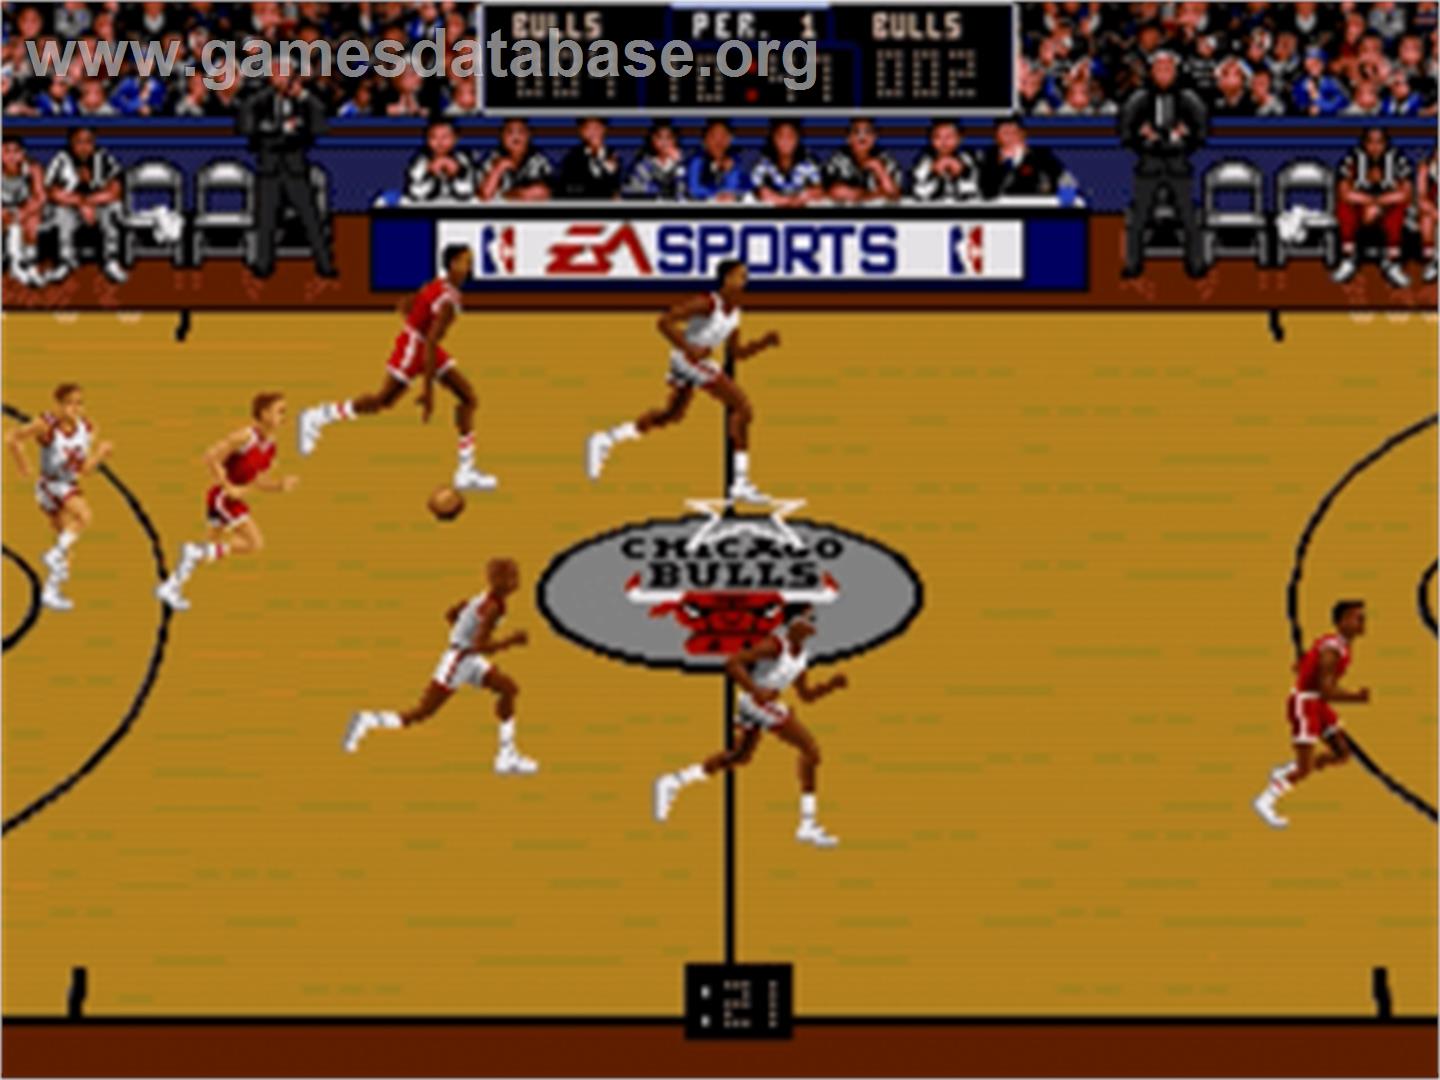 Bulls vs. Blazers and the NBA Playoffs - Sega Nomad - Artwork - In Game